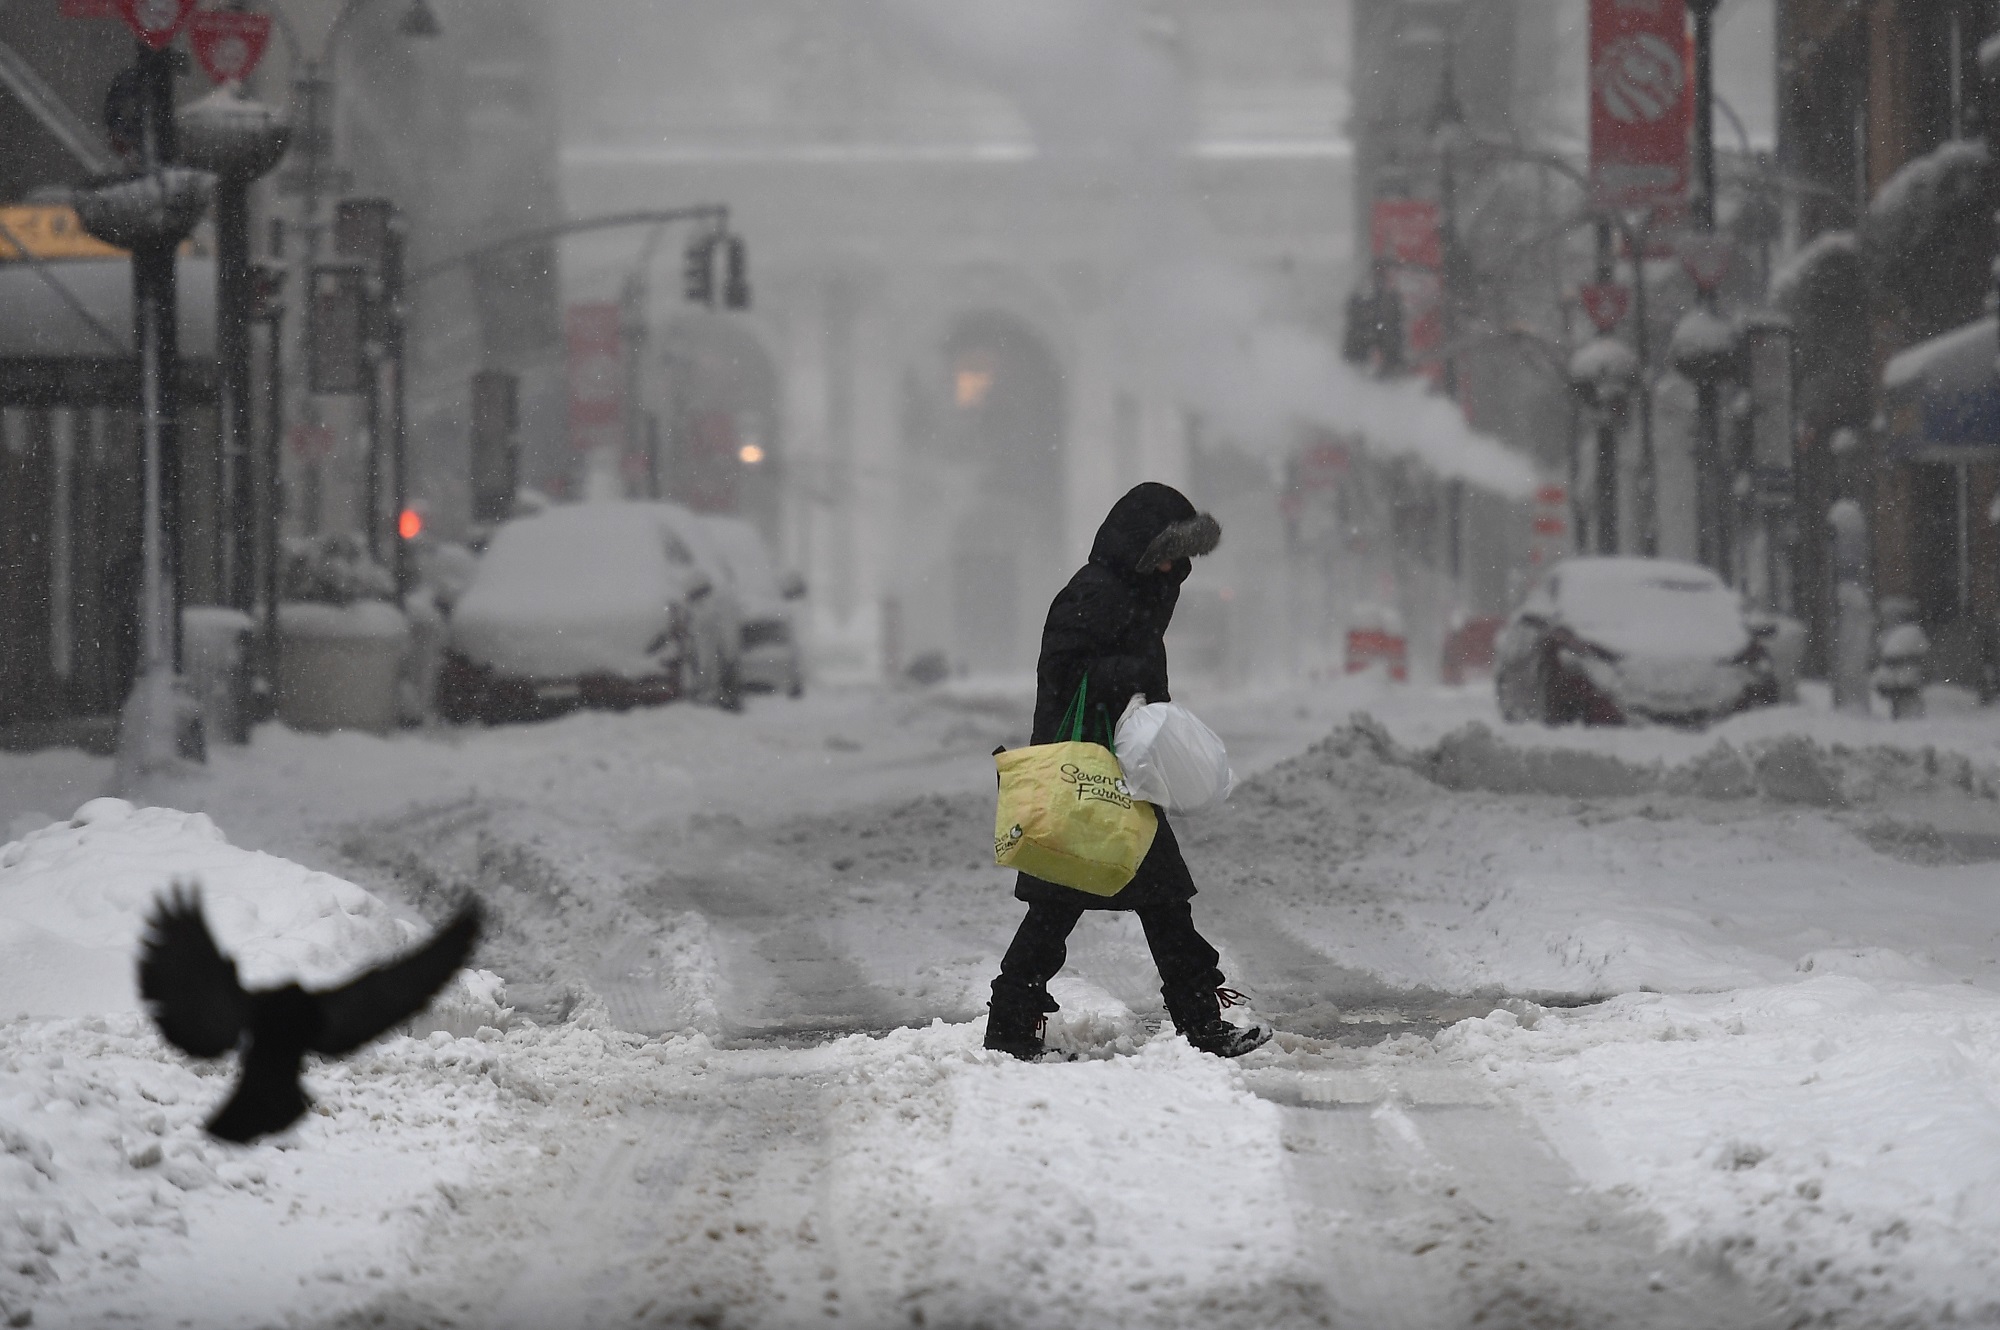 When New York will face its worst snowfall due to La Niña, according to a new weather report